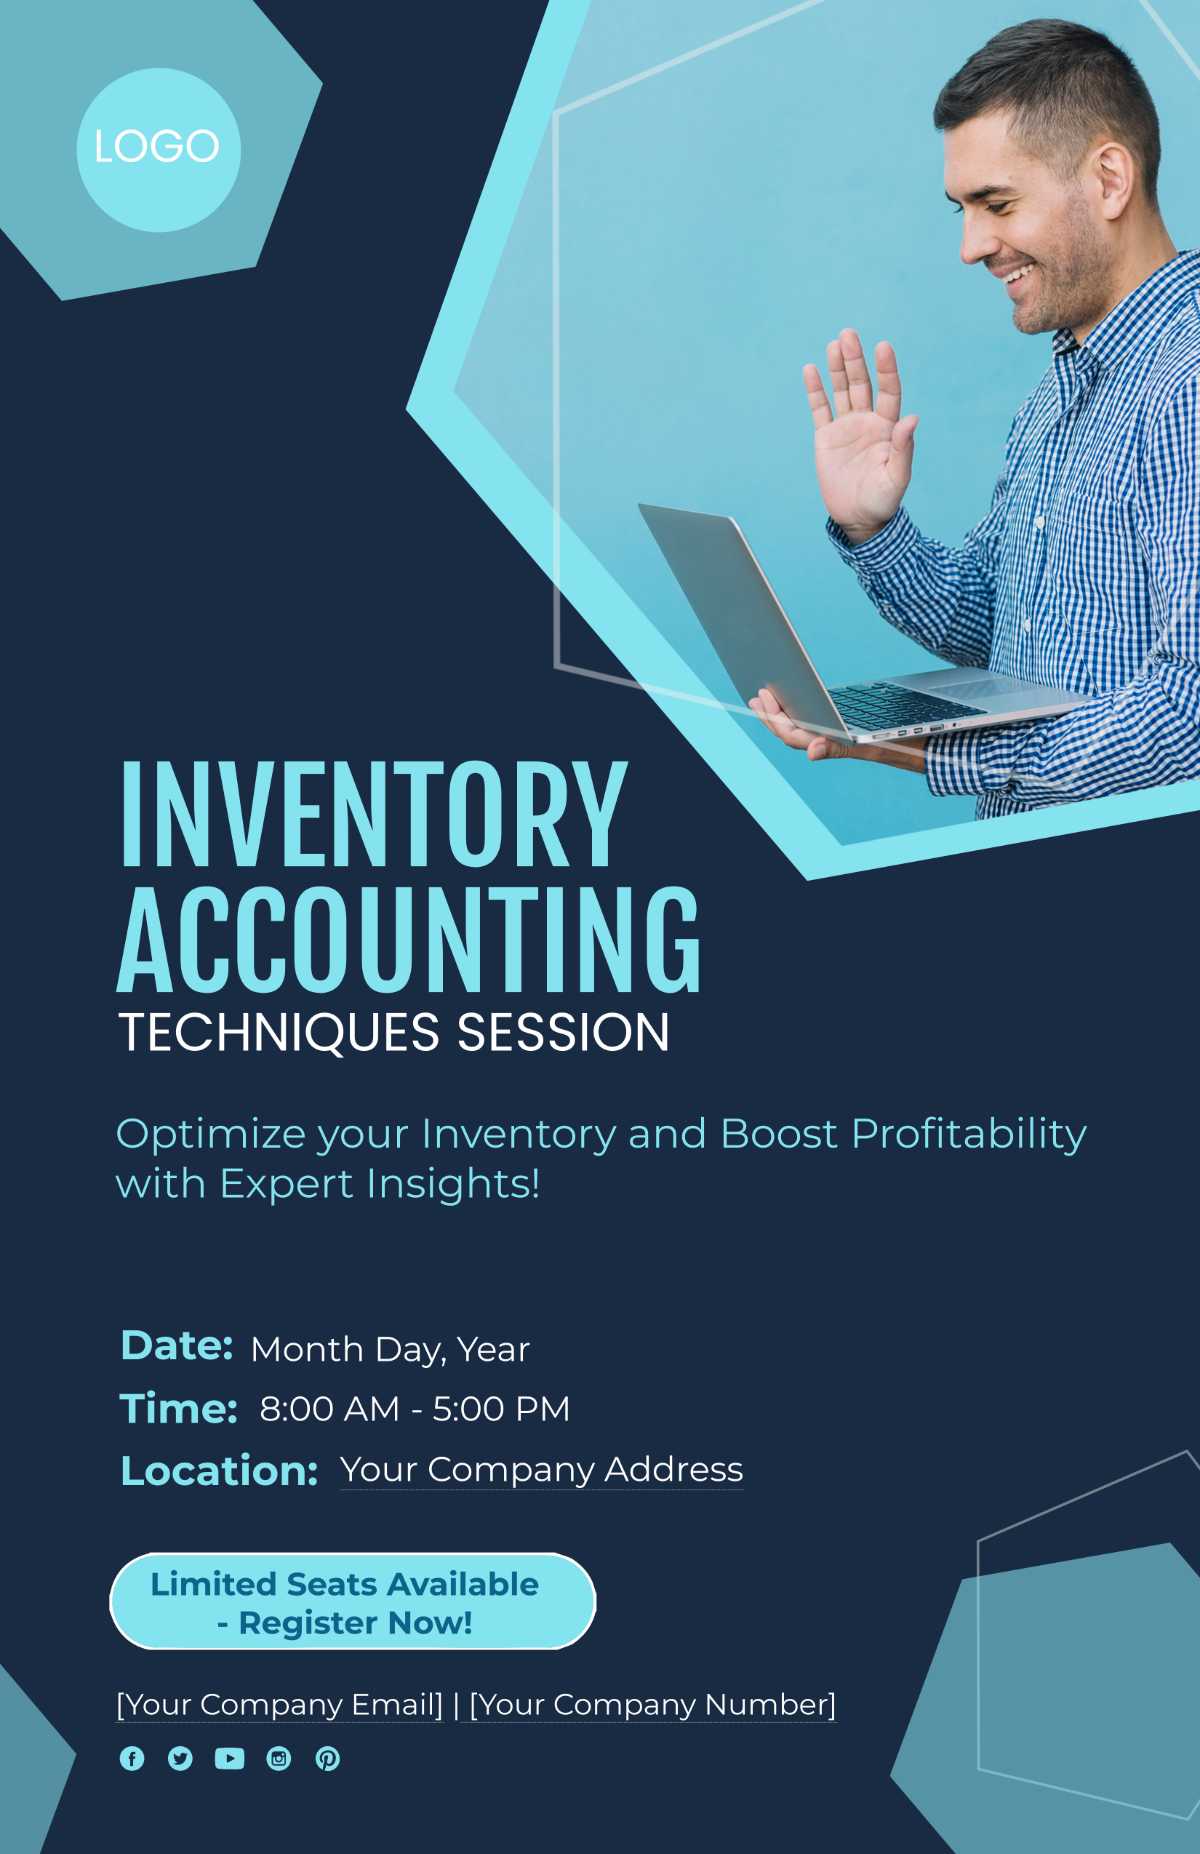 Inventory Accounting Techniques Session Poster Template